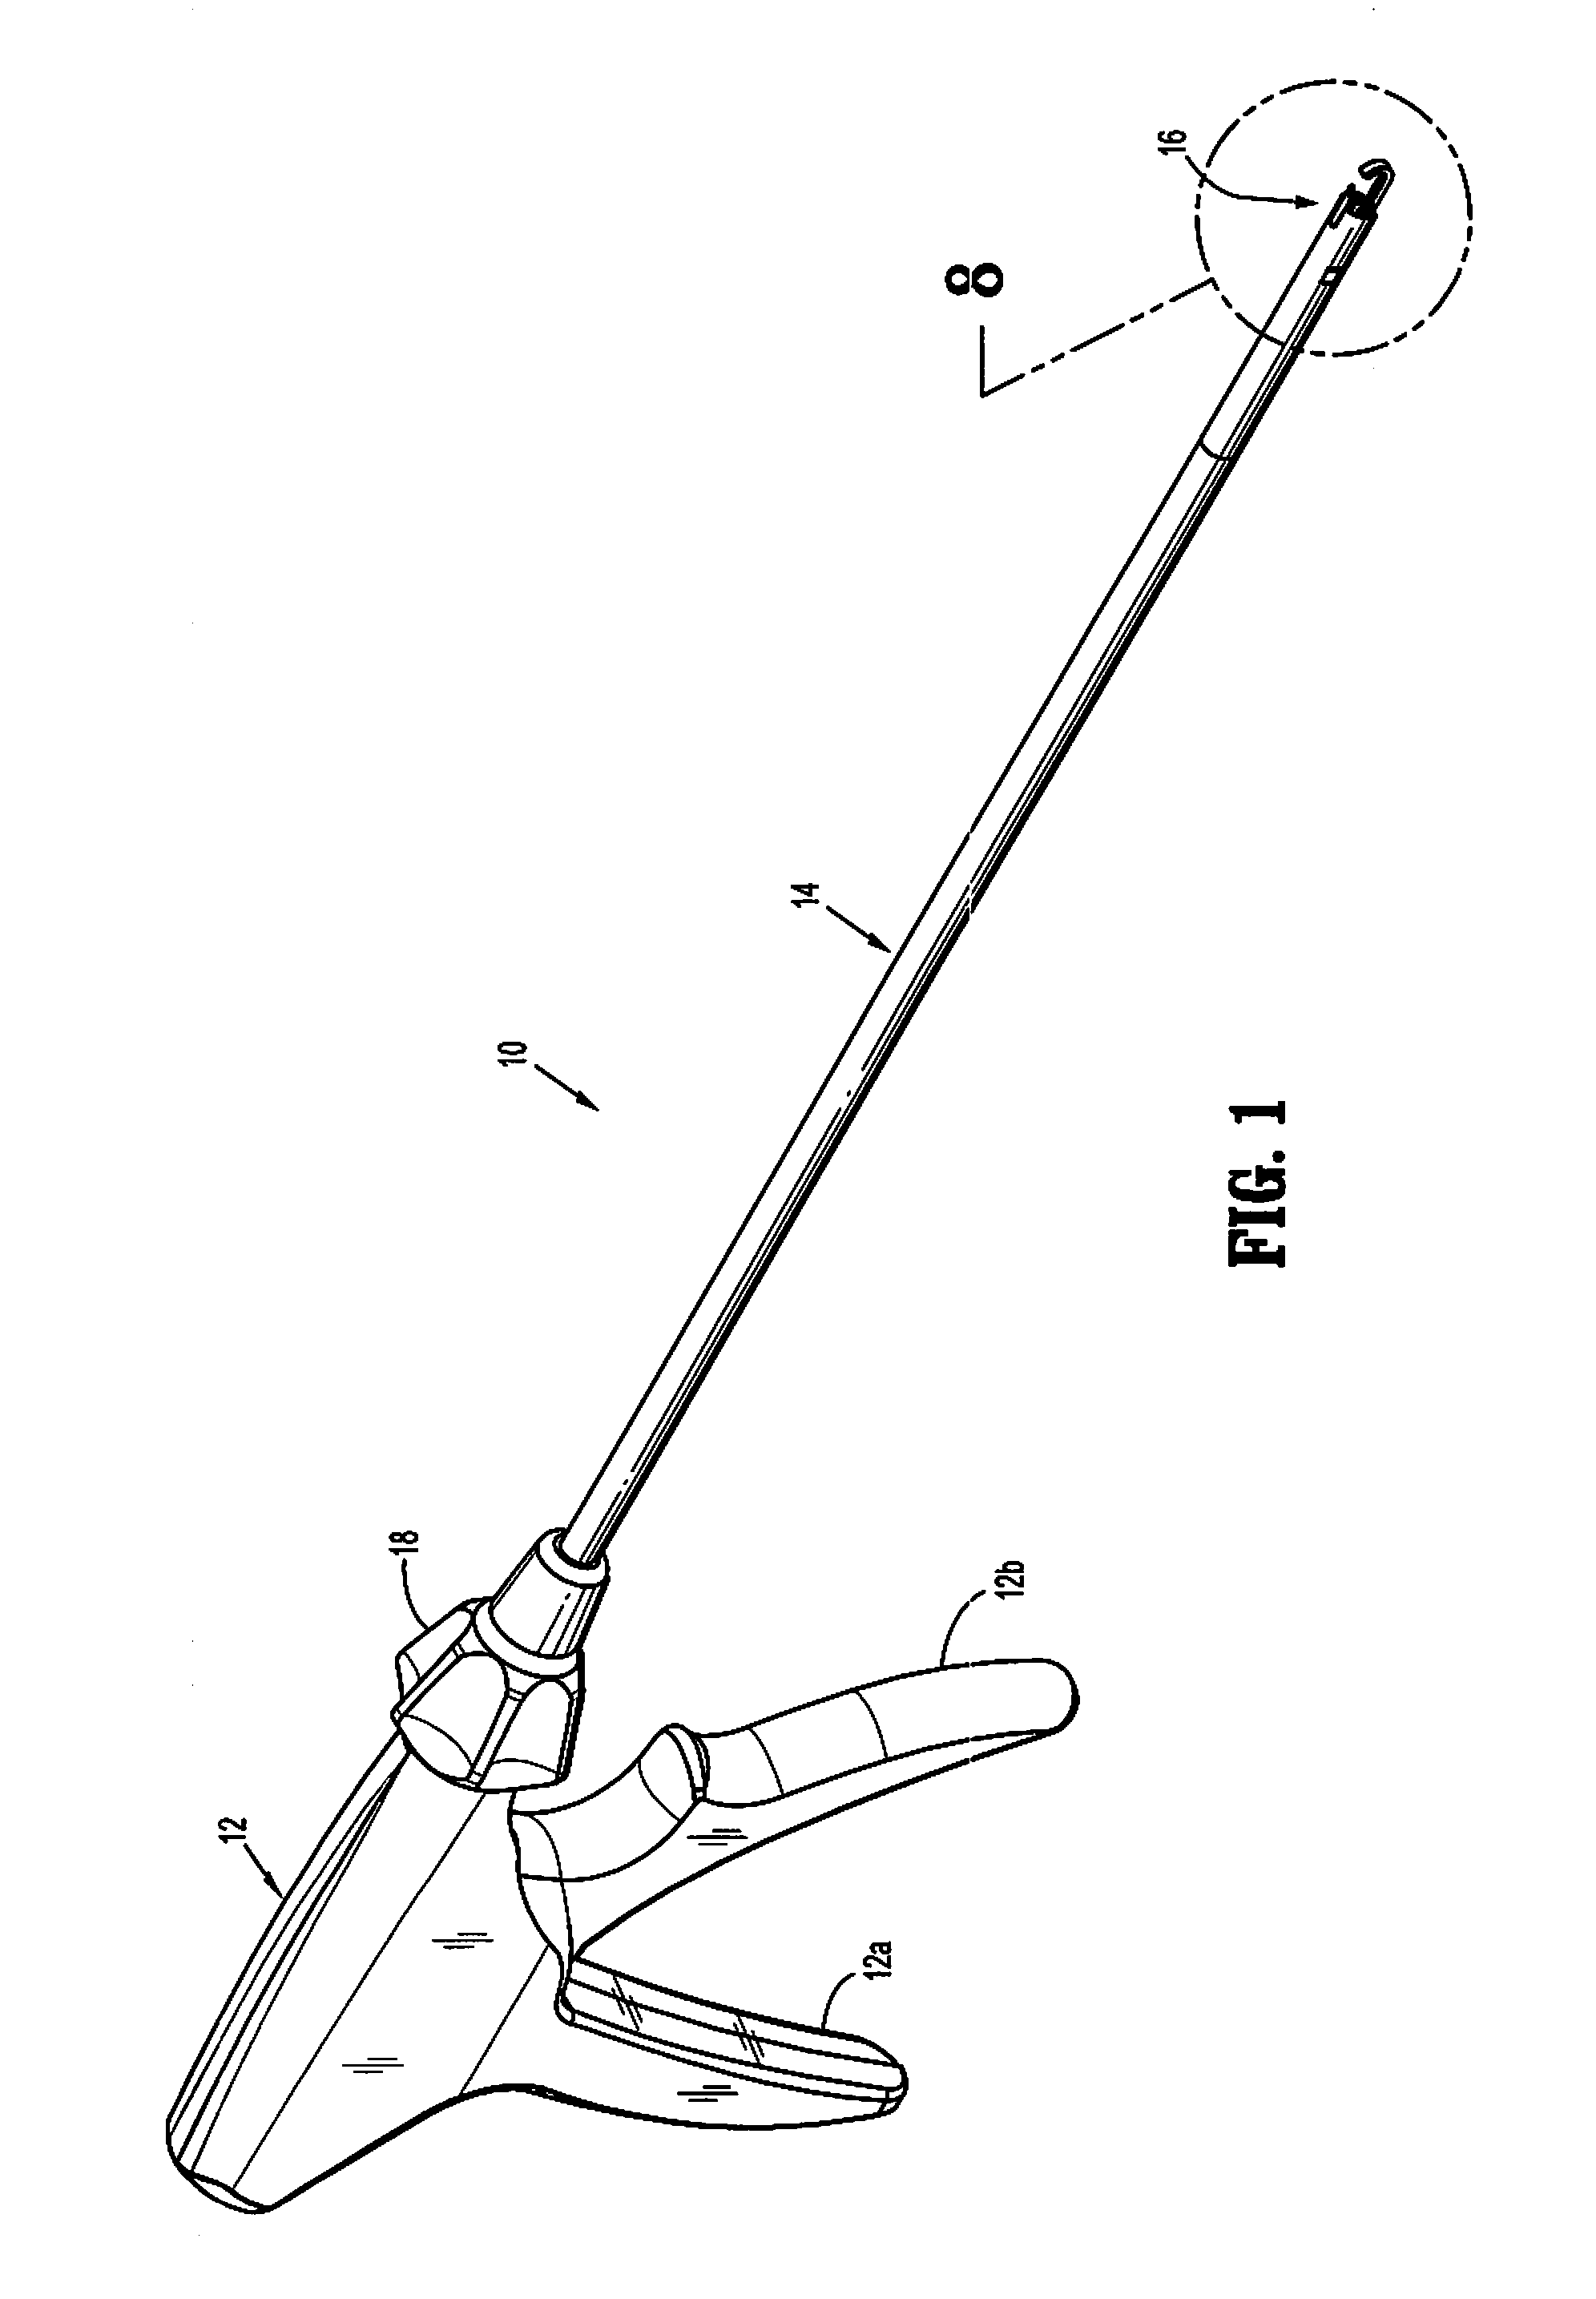 Clip applying apparatus and ligation clip